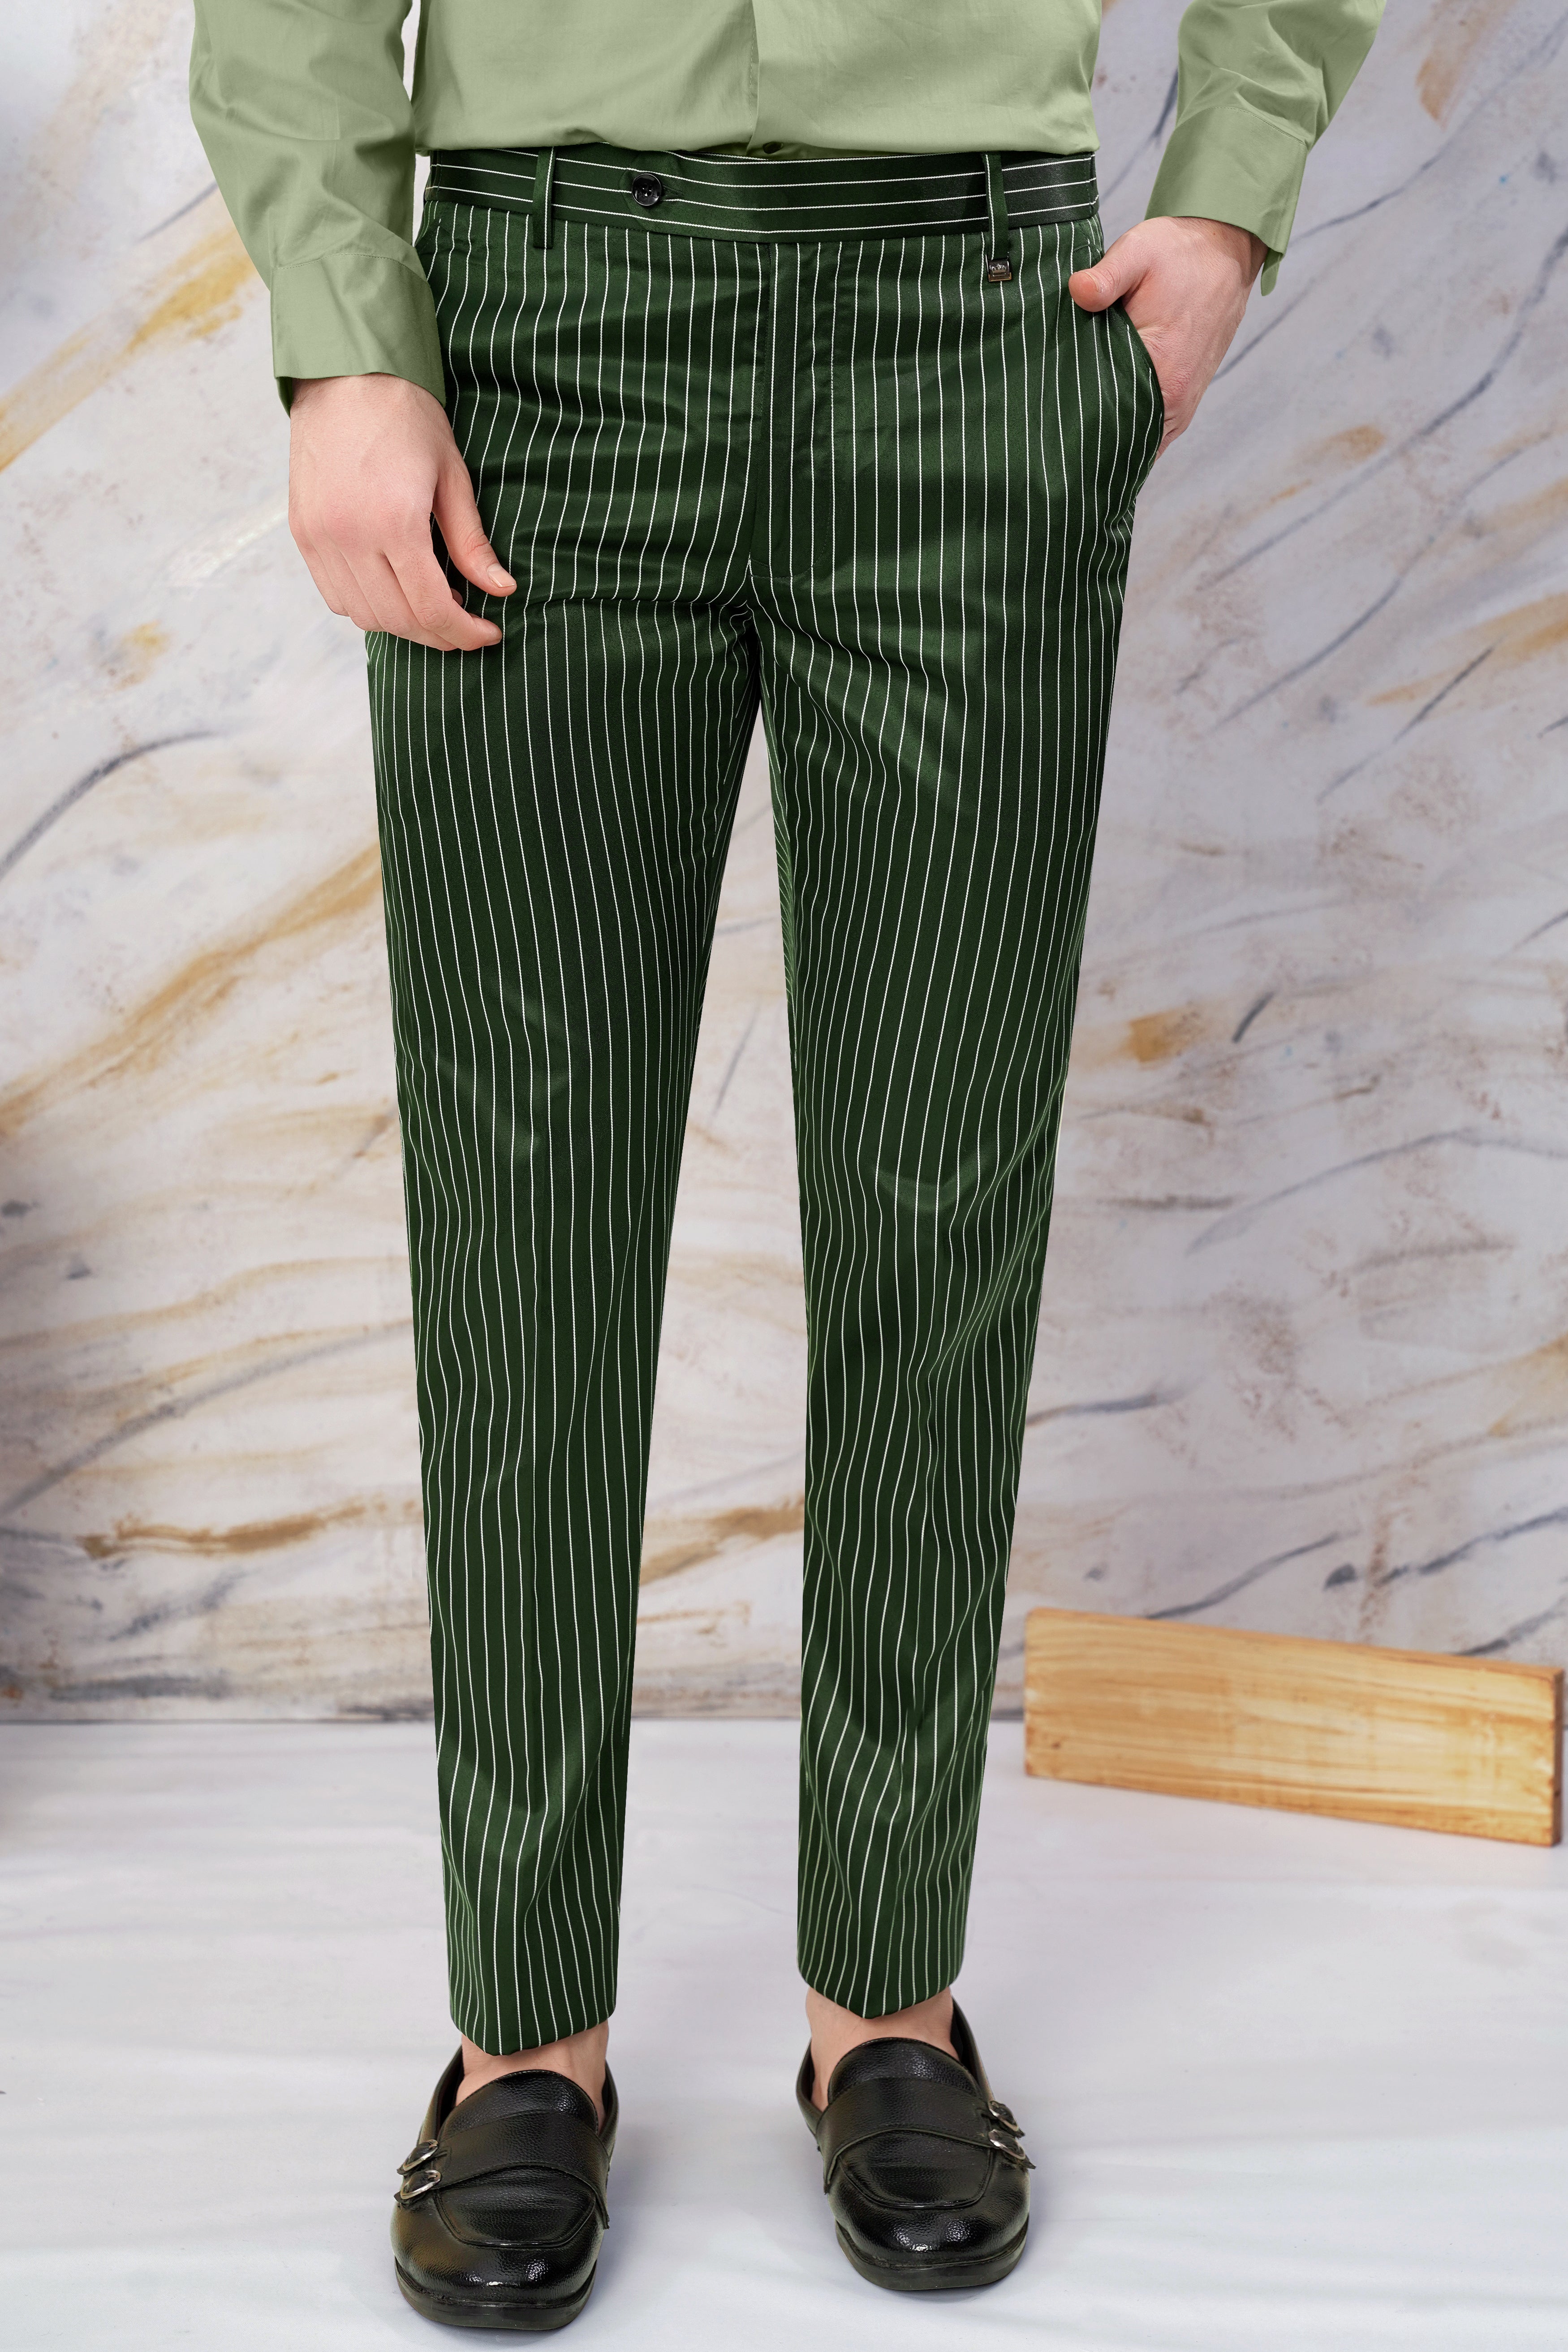 Myrtle Green and White Striped Wool Rich Suit ST3086-SB-36, ST3086-SB-38, ST3086-SB-40, ST3086-SB-42, ST3086-SB-44, ST3086-SB-46, ST3086-SB-48, ST3086-SB-50, ST3086-SB-52, ST3086-SB-54, ST3086-SB-56, ST3086-SB-58, ST3086-SB-60